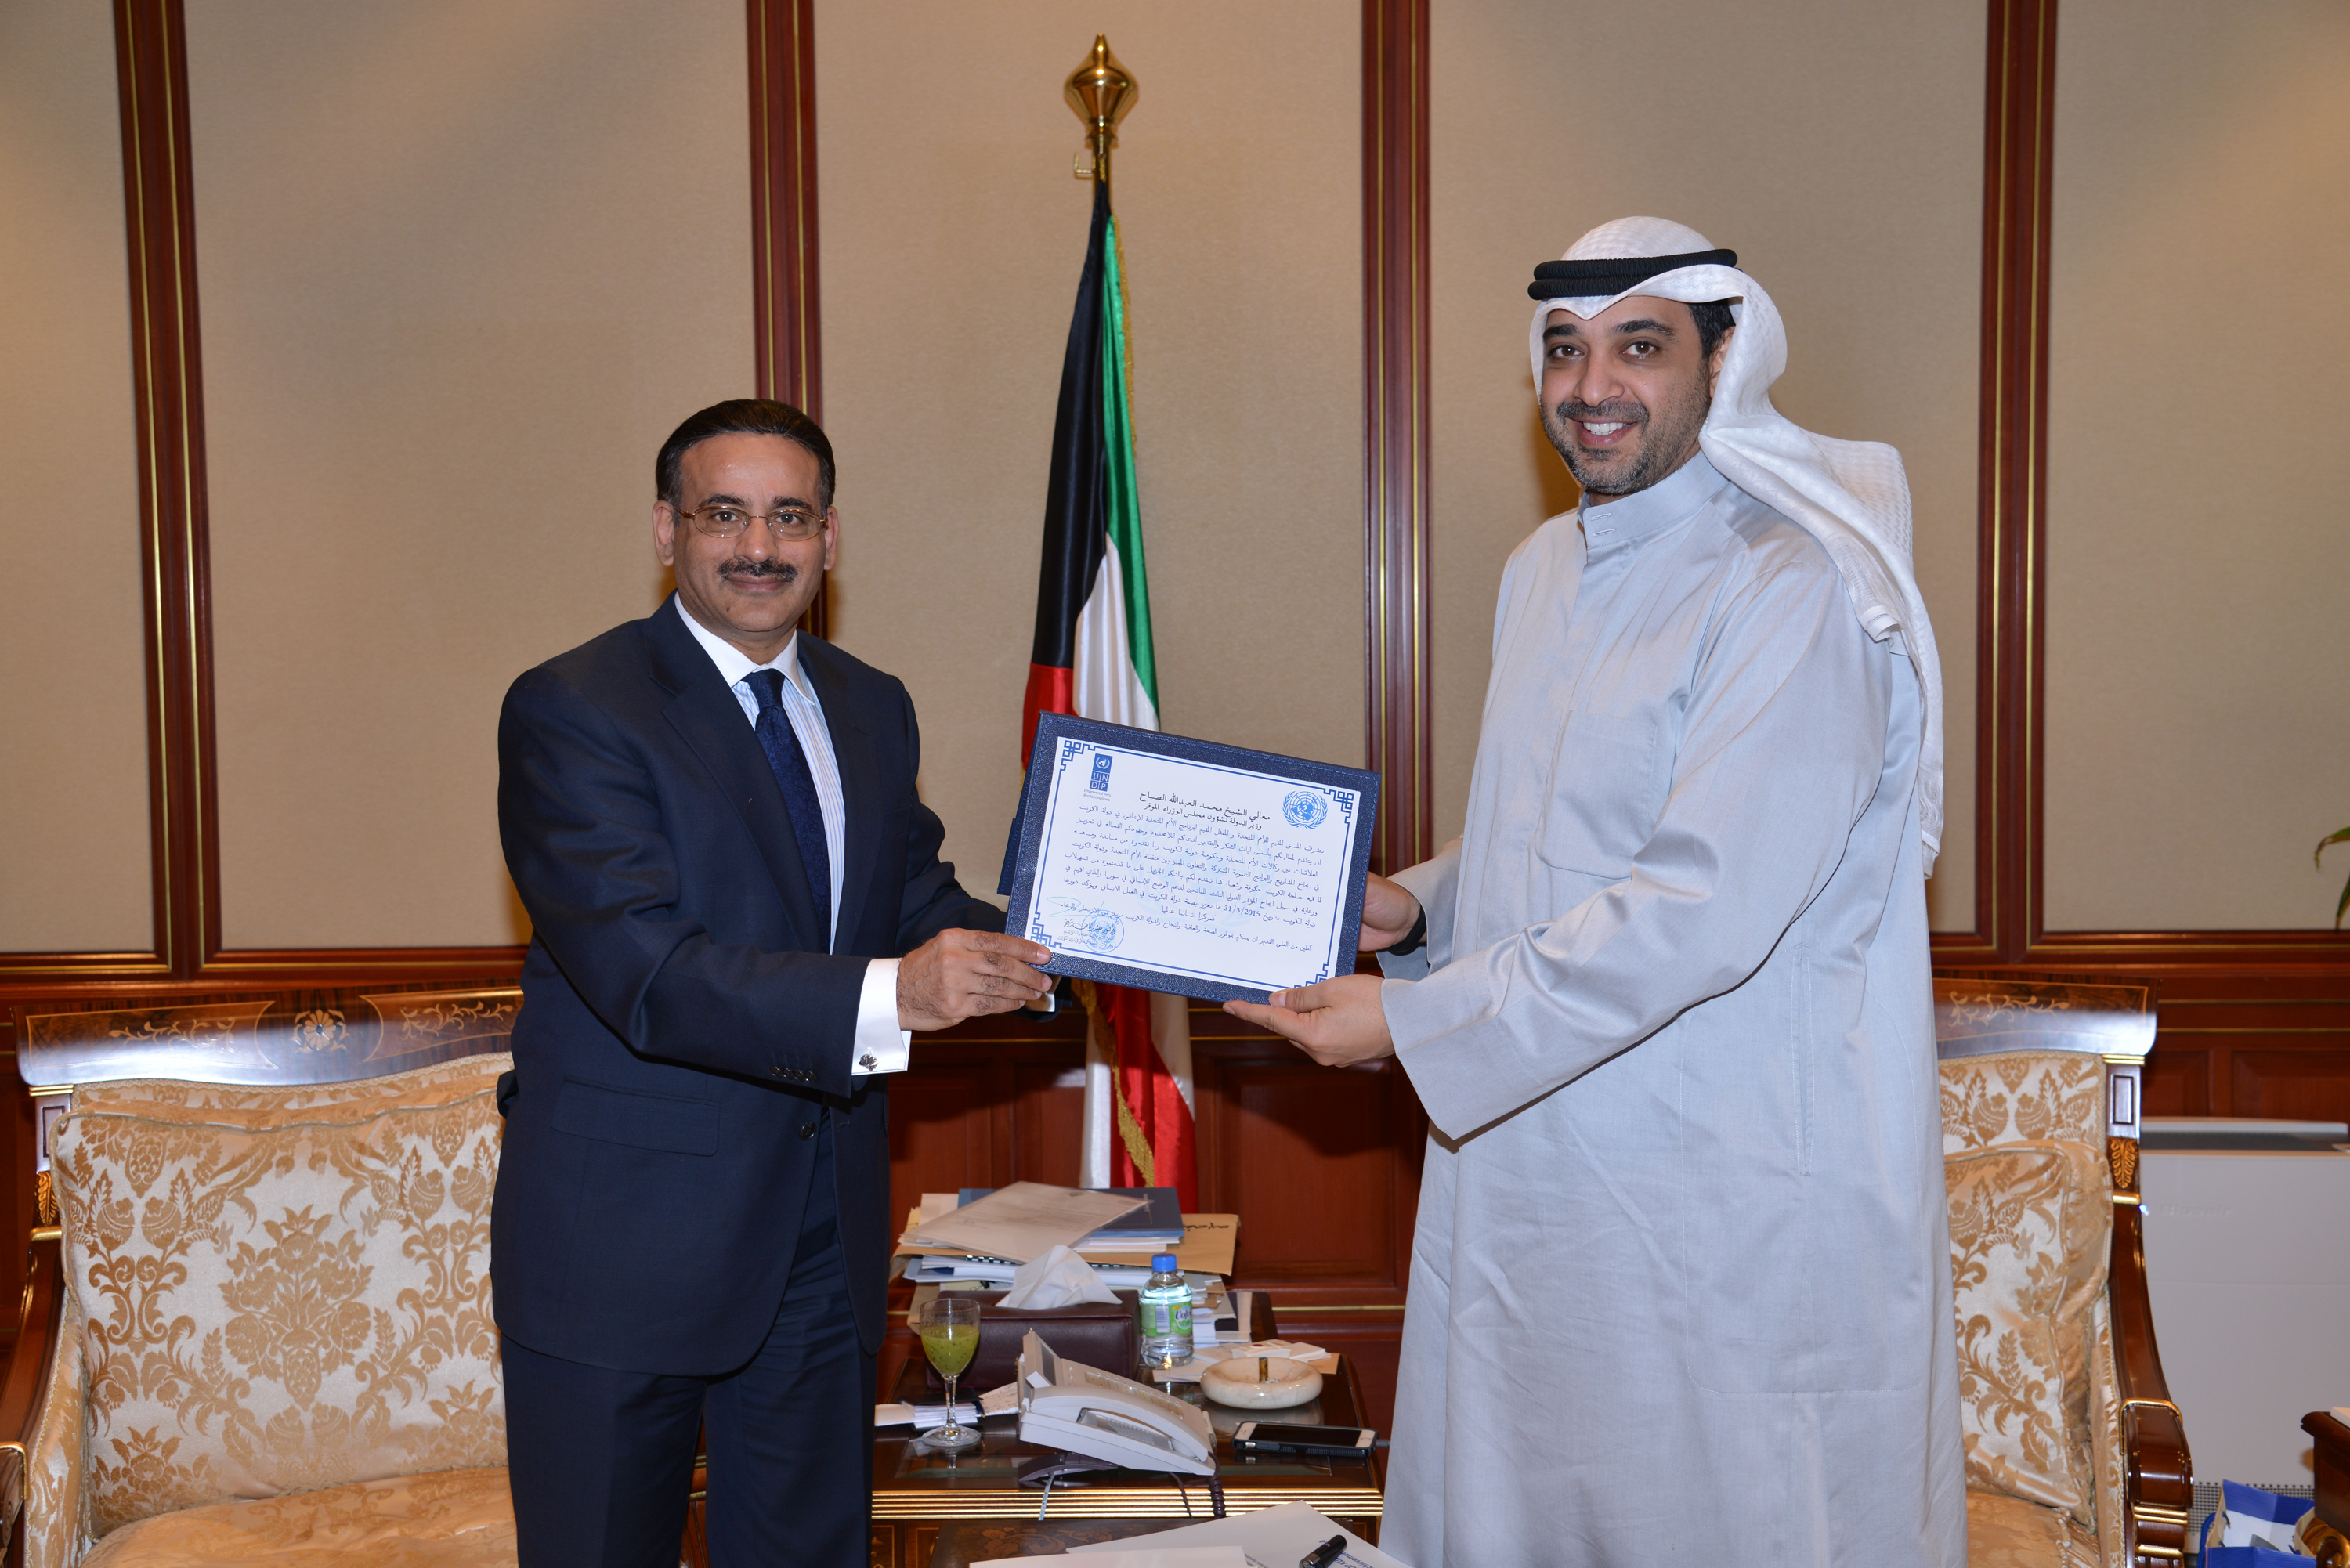 Minister of State for Cabinet Affairs Sheikh Mohammad Abdullah Al-Mubarak Al-Sabah received the Resident Coordinator of the United Nations and Resident representative of the United Nations Development Programme Dr. Mubashar Sheikh